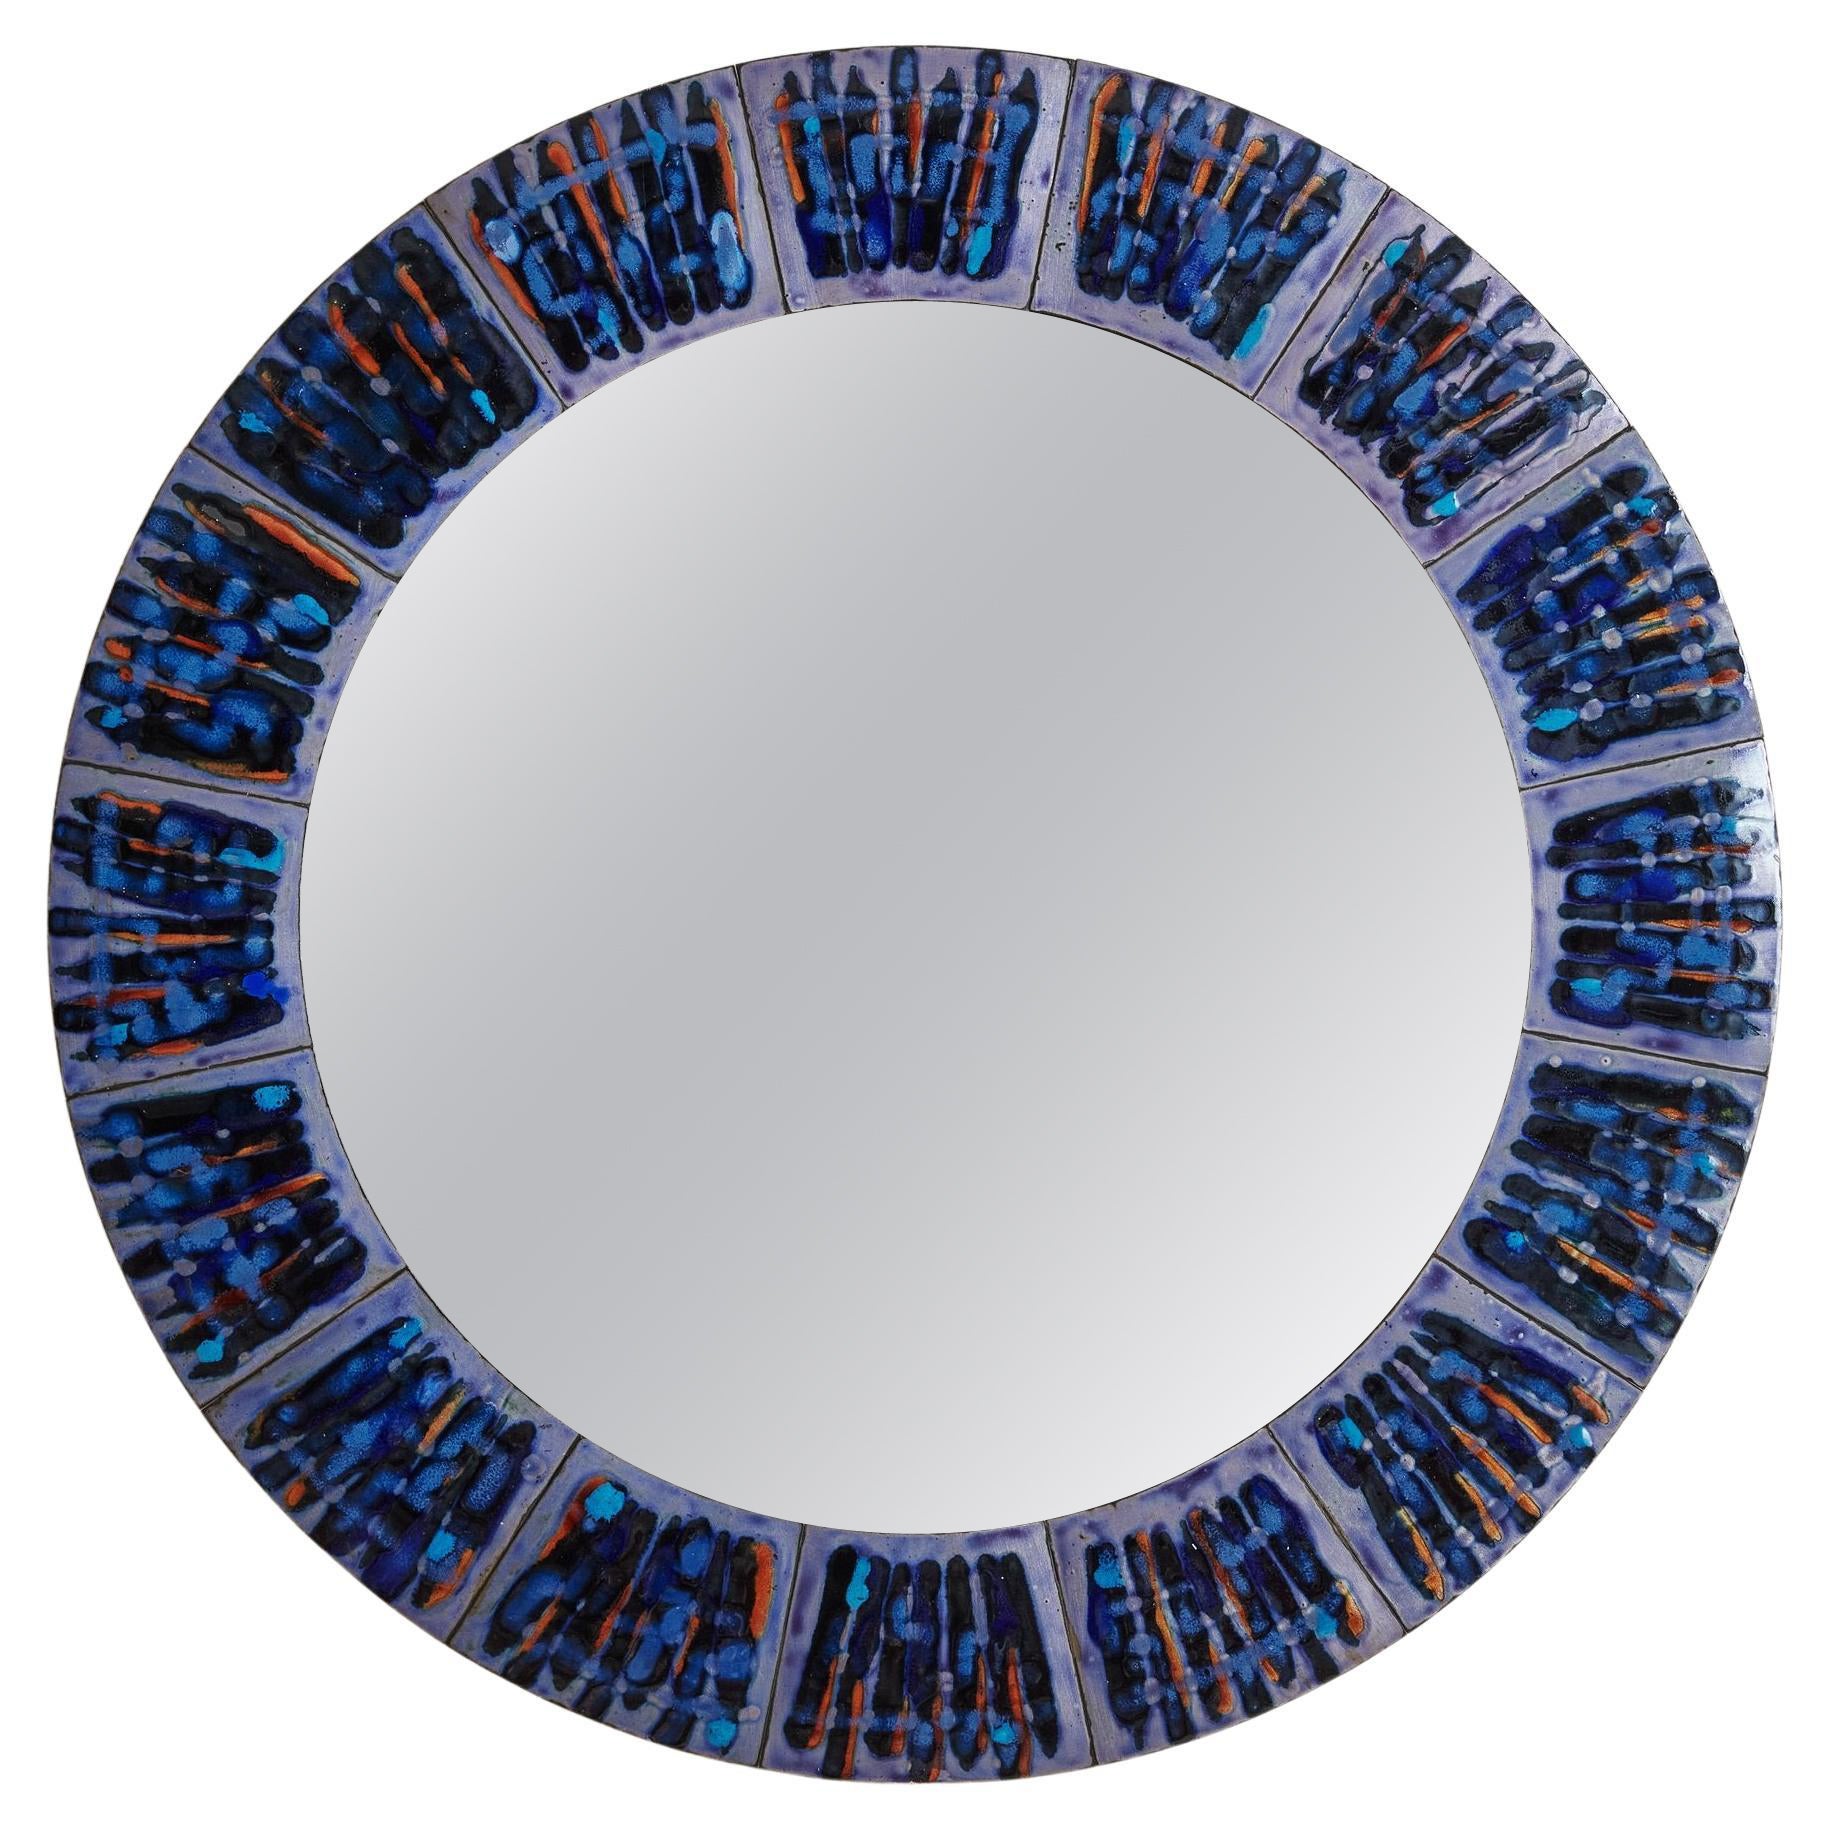 2/5 Blue Hand-Painted Enamel Mirror by Bodil Eje, Denmark 1960s For Sale